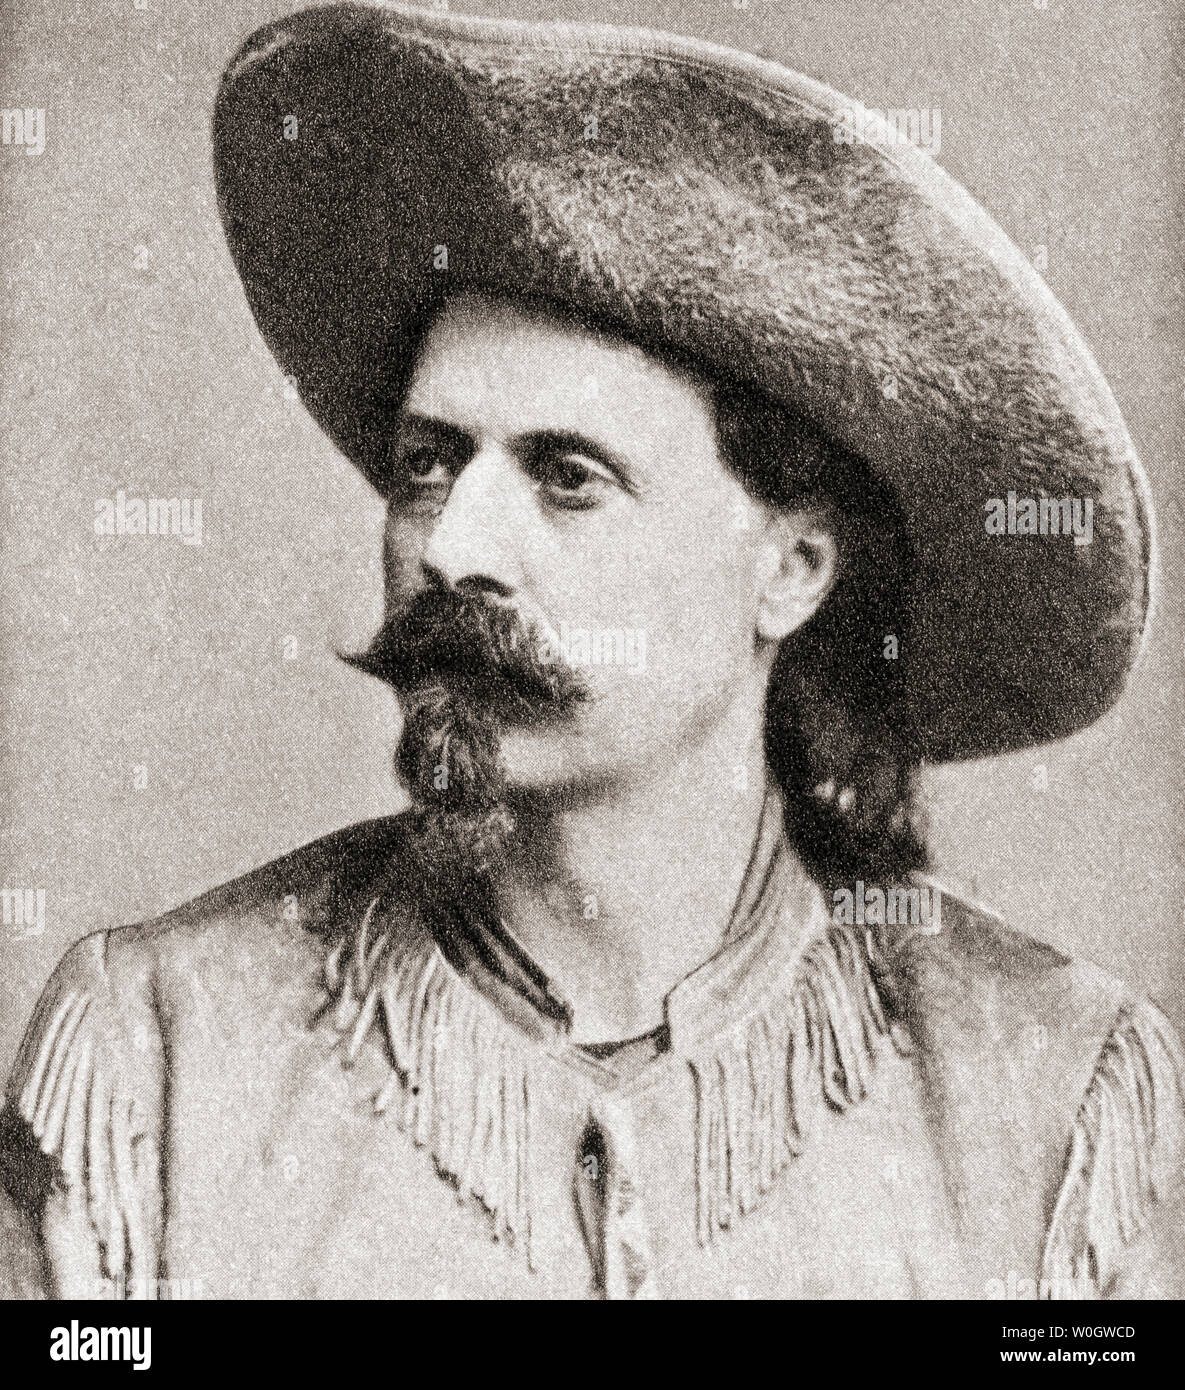 William Frederick 'Buffalo Bill' Cody, 1846 – 1917.  American scout, bison hunter, and showman.  From The Pageant of the Century, published 1934. Stock Photo